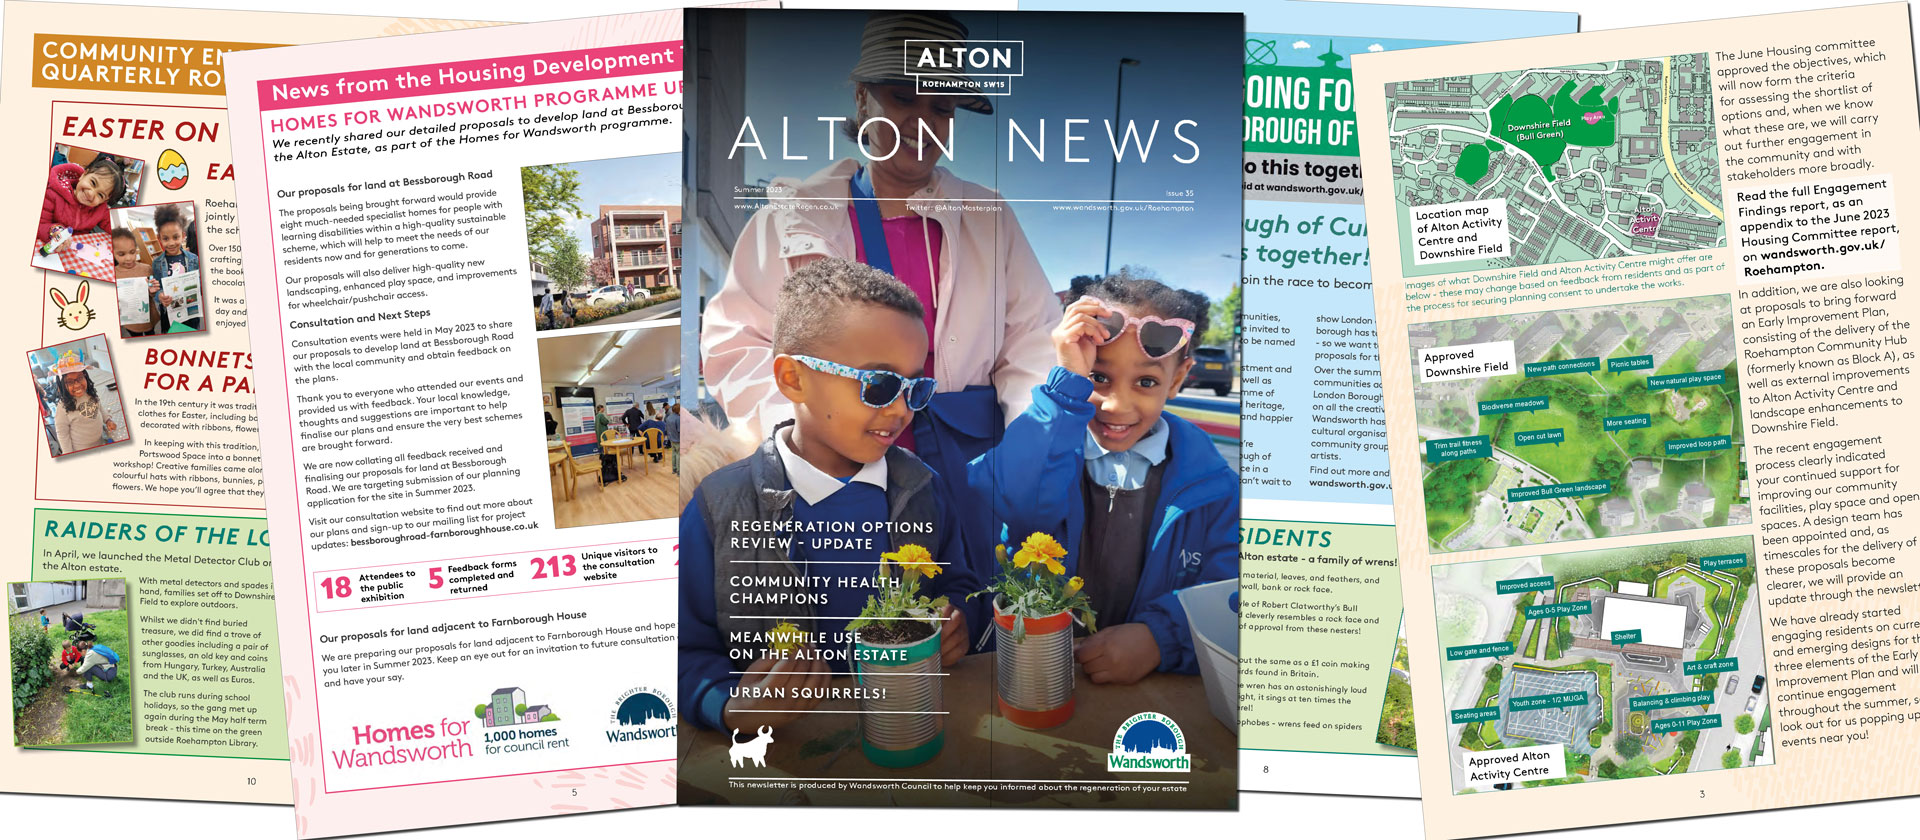 An image showing some of the pages of Alton News, Issue 35.